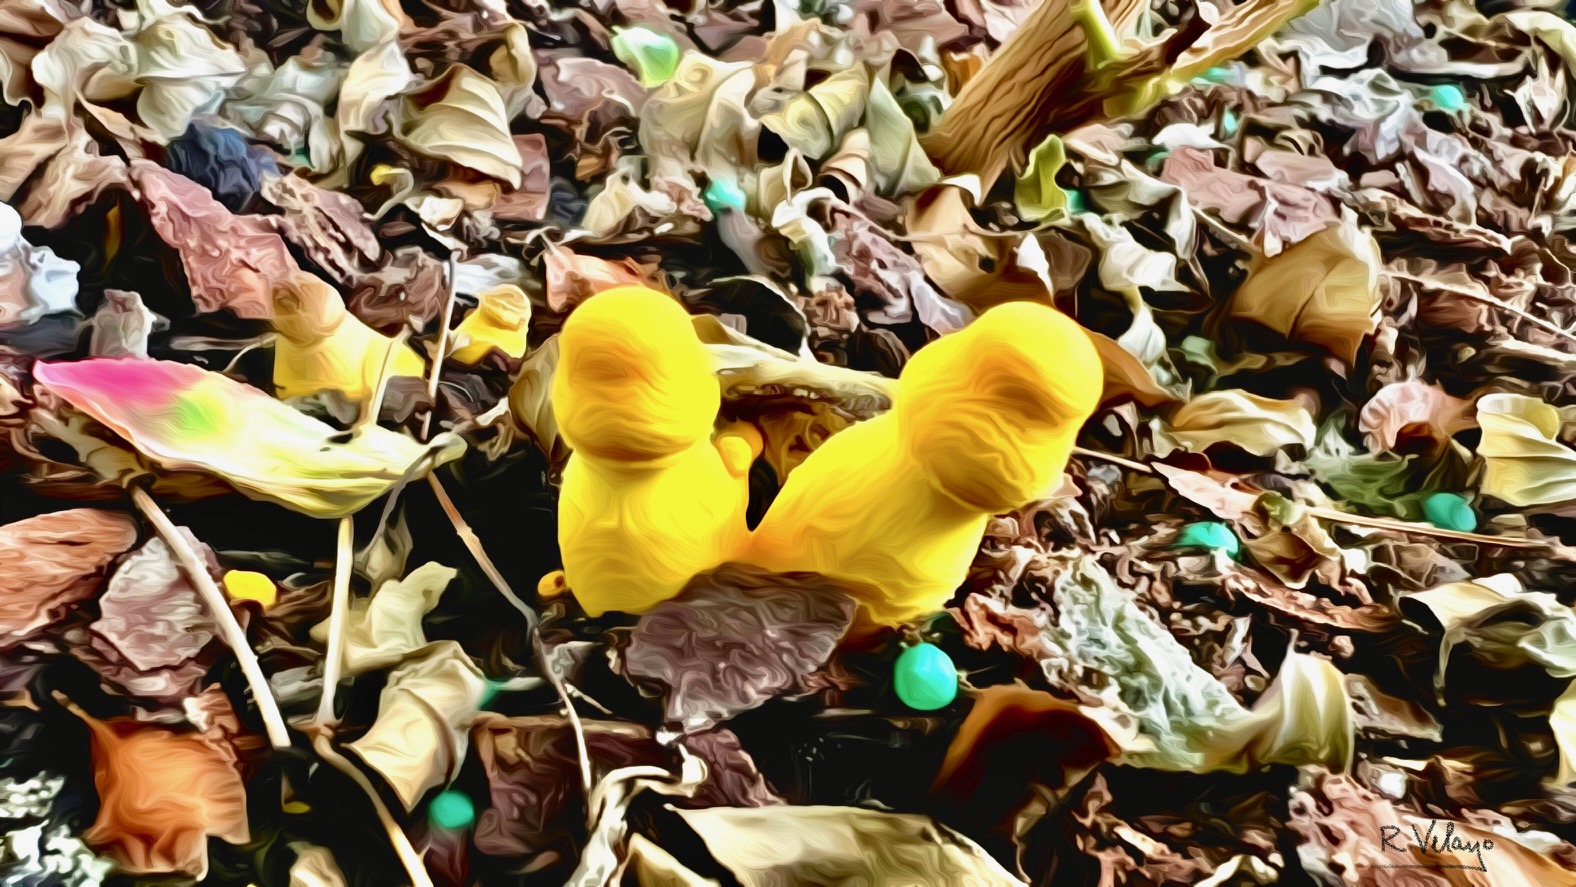 "TWO STRANGE YELLOW MUSHROOMS FROM MY PATIO VASE IN ST. PETE" [Created: 7/19/2022]